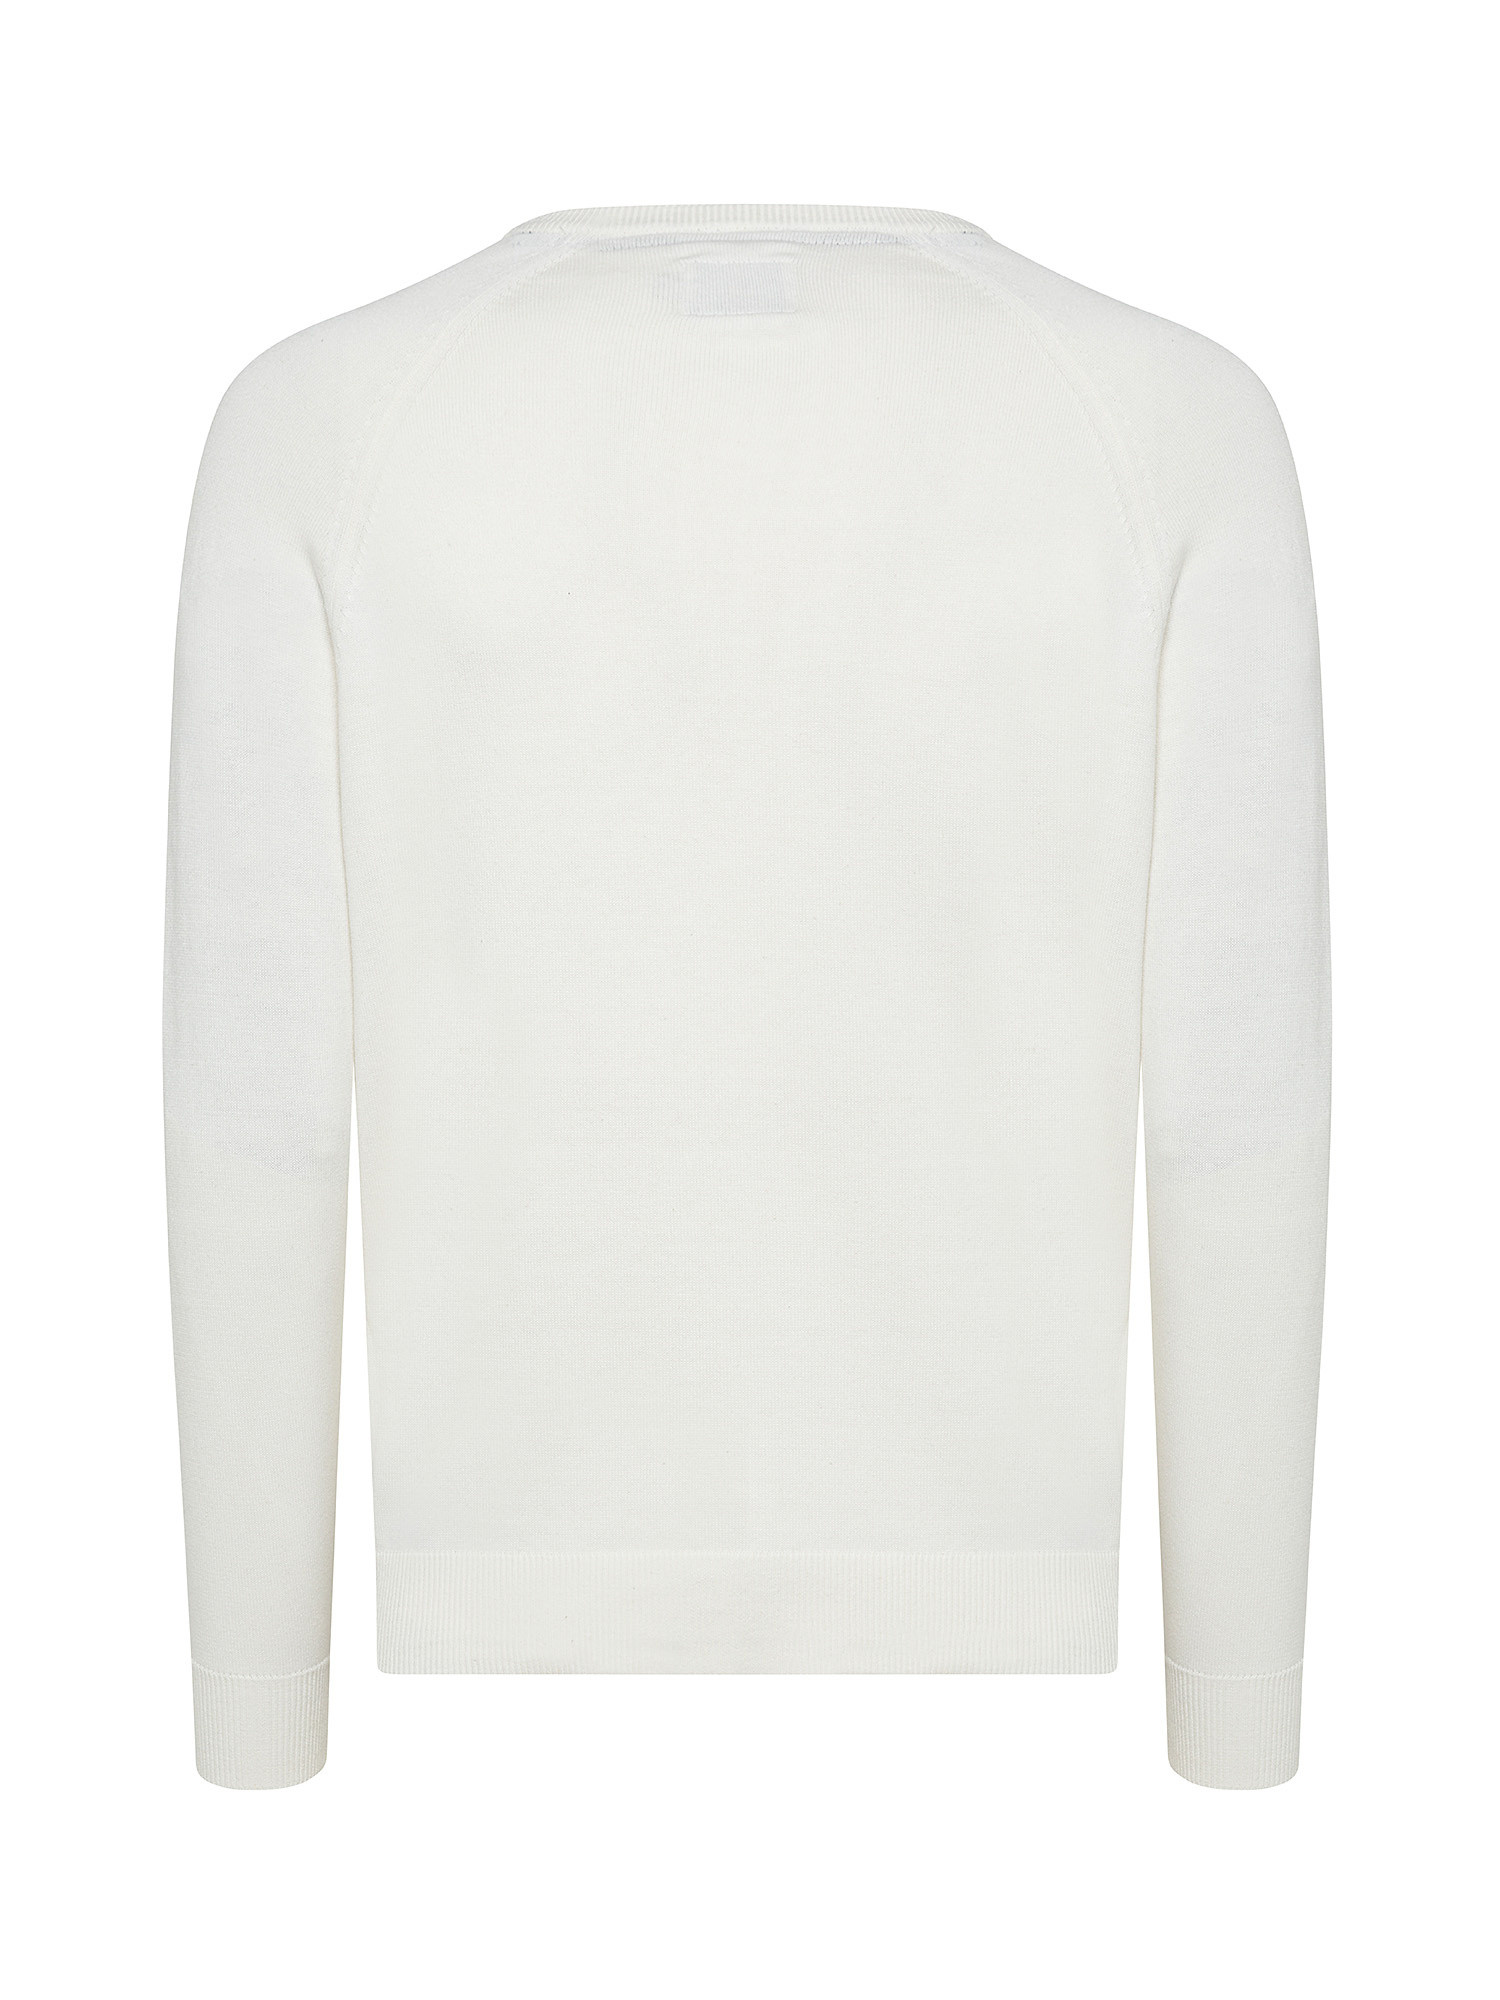 Pepe Jeans - Crewneck cotton pullover, White Ivory, large image number 1